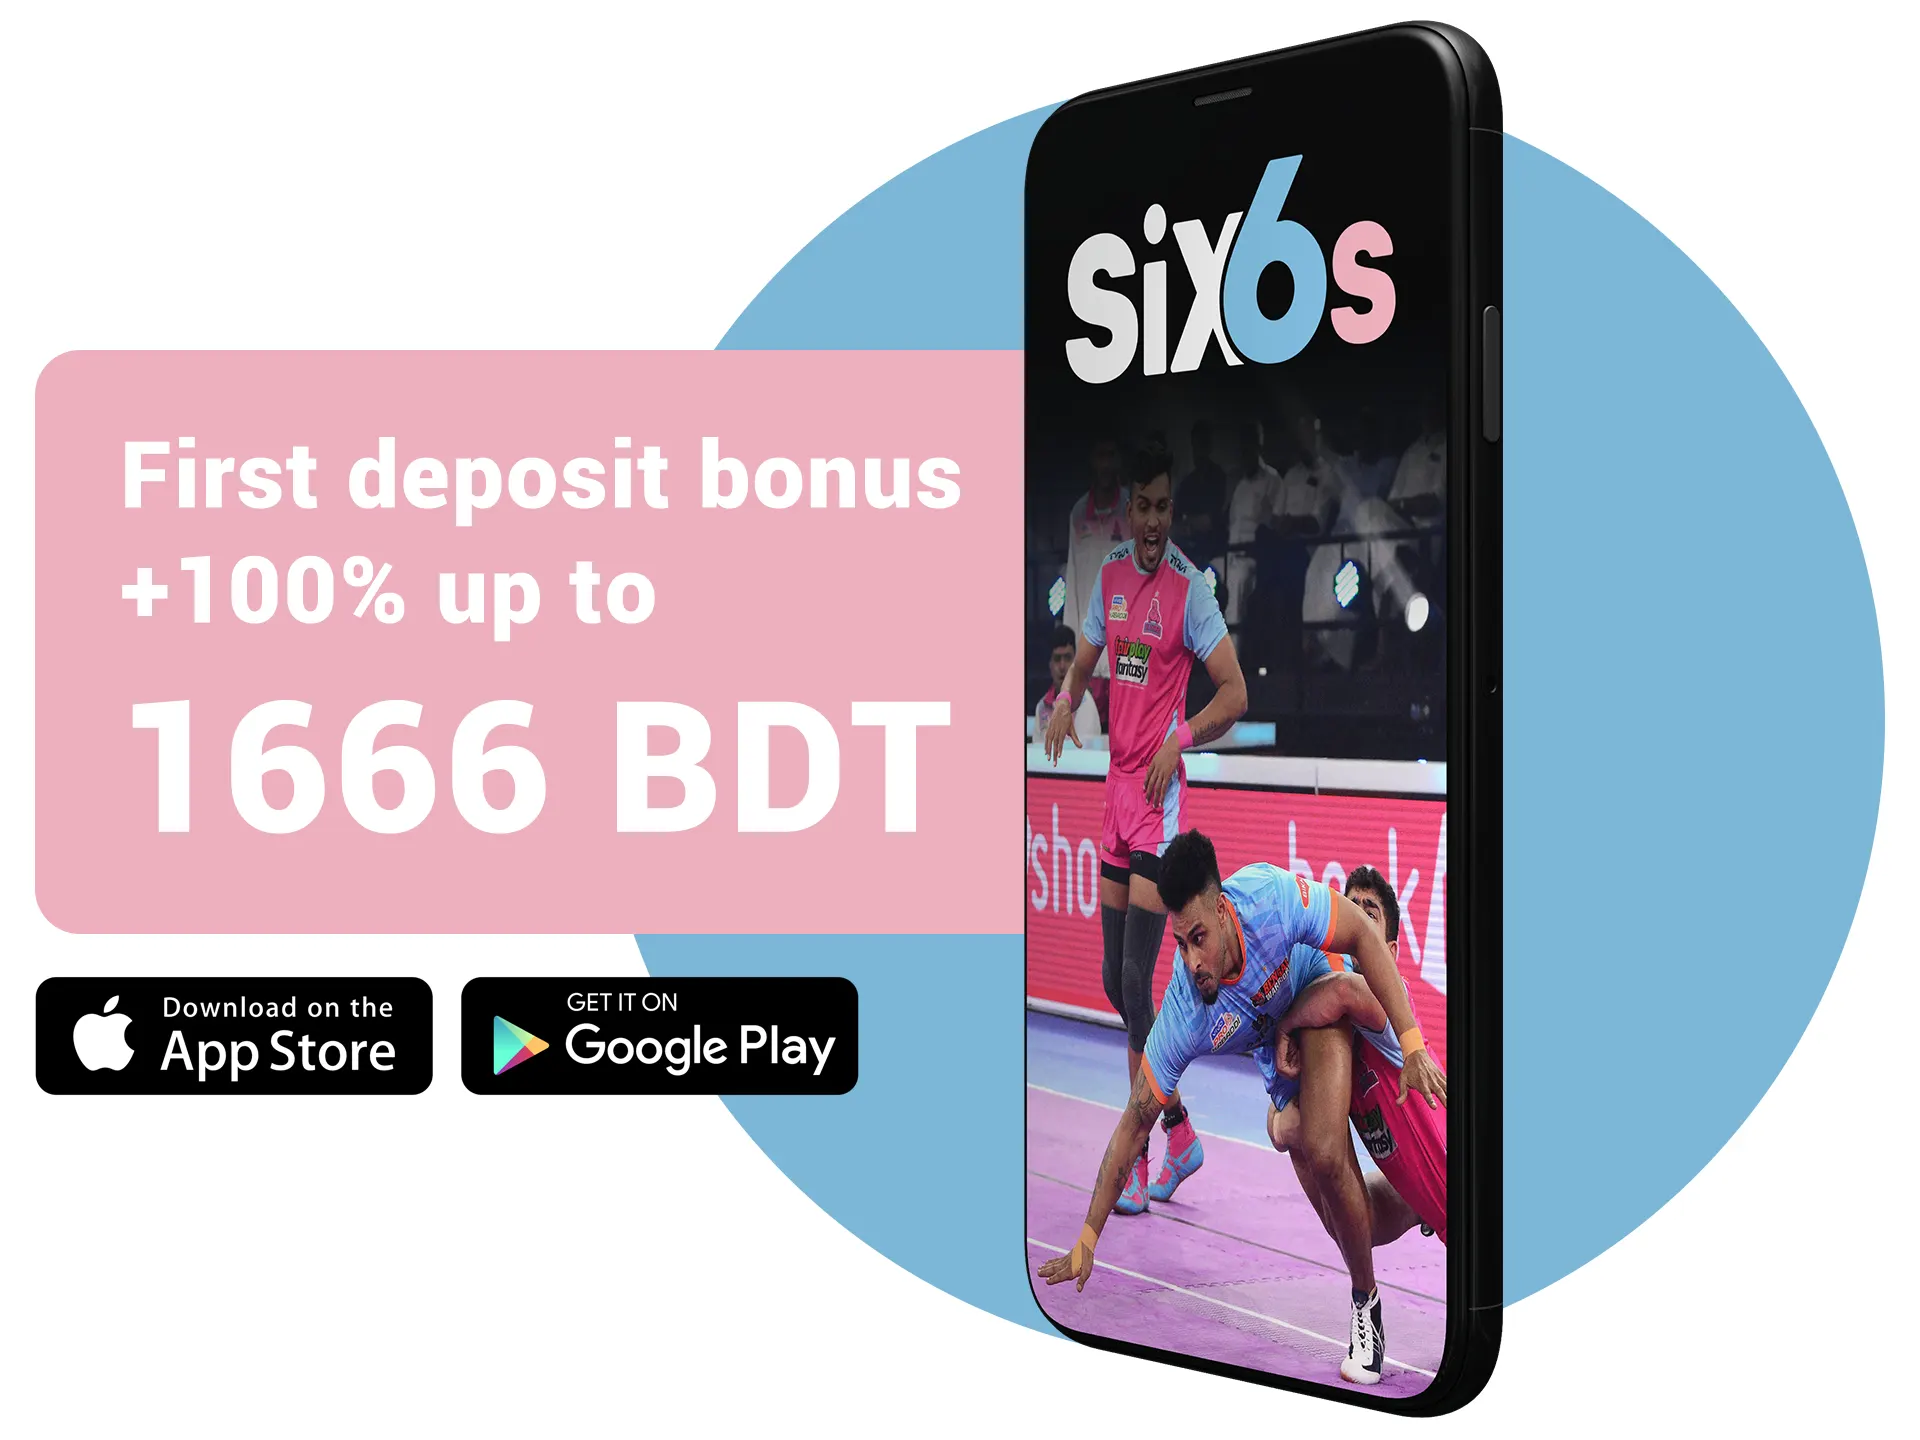 Try making bets on Kabaddi on the Six6s website or in the app.